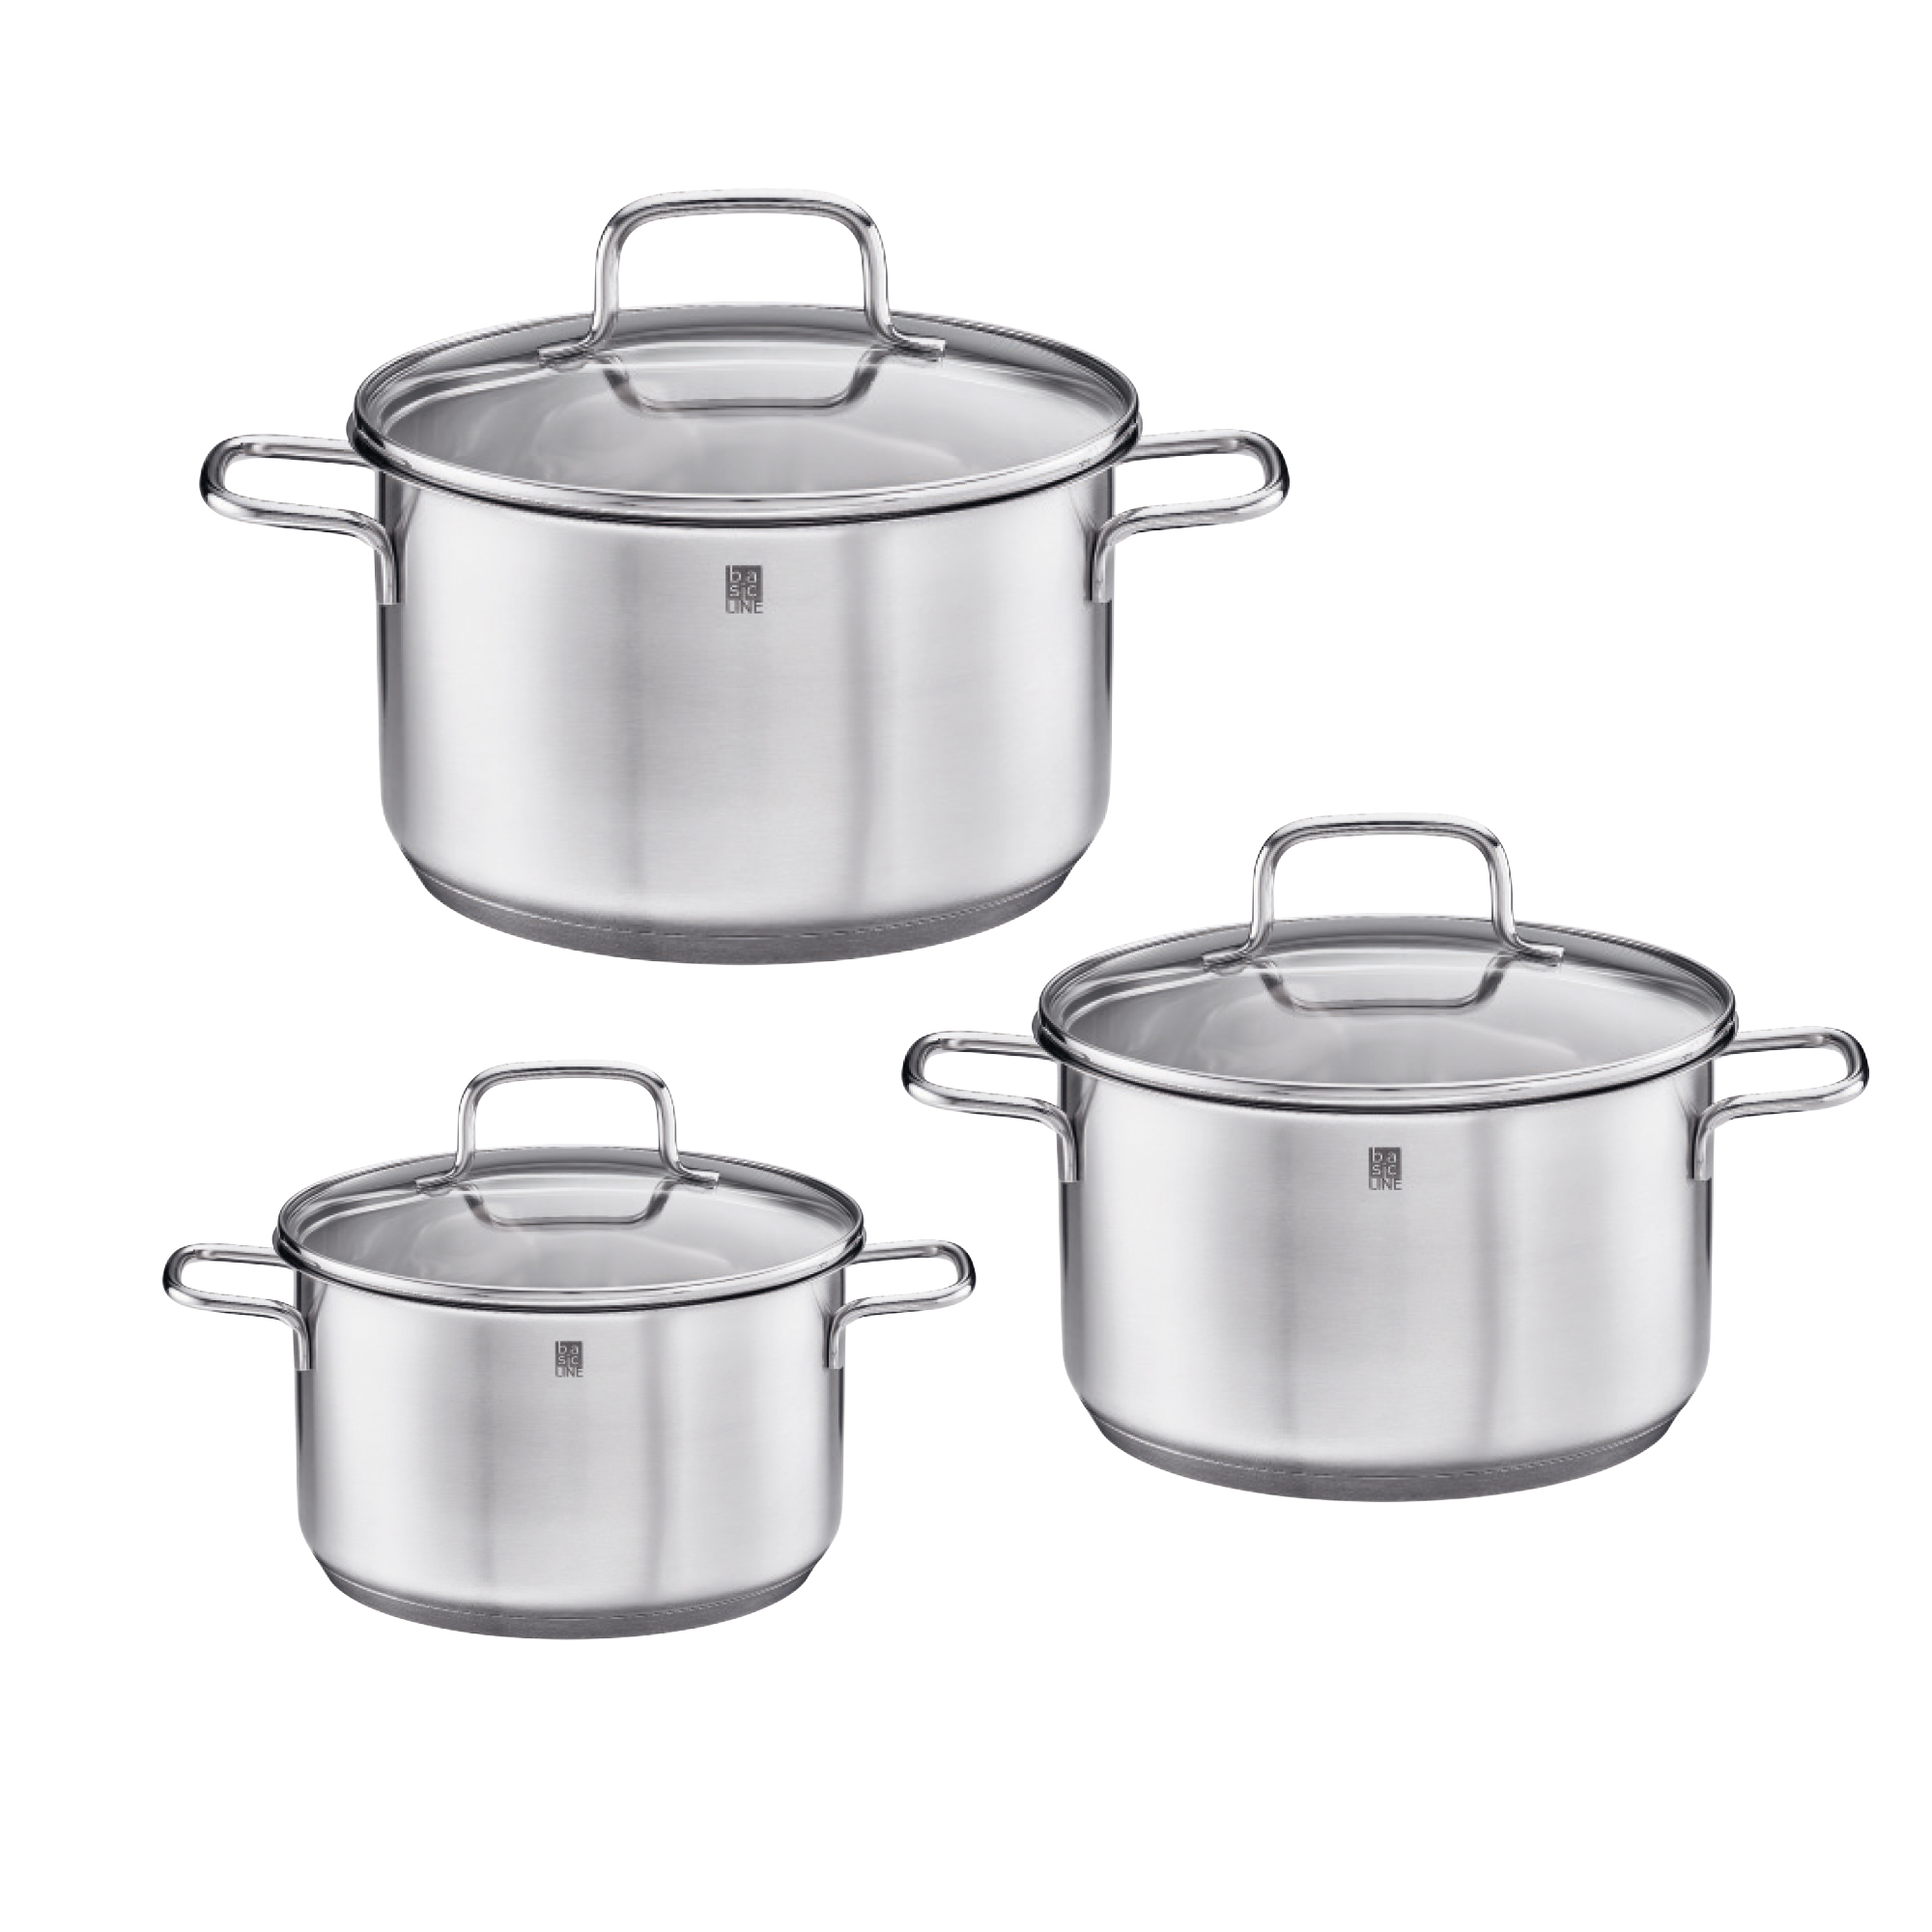 Cookware Set Basic Line 3 pcs. (18/10 stainless steel) with glass lid